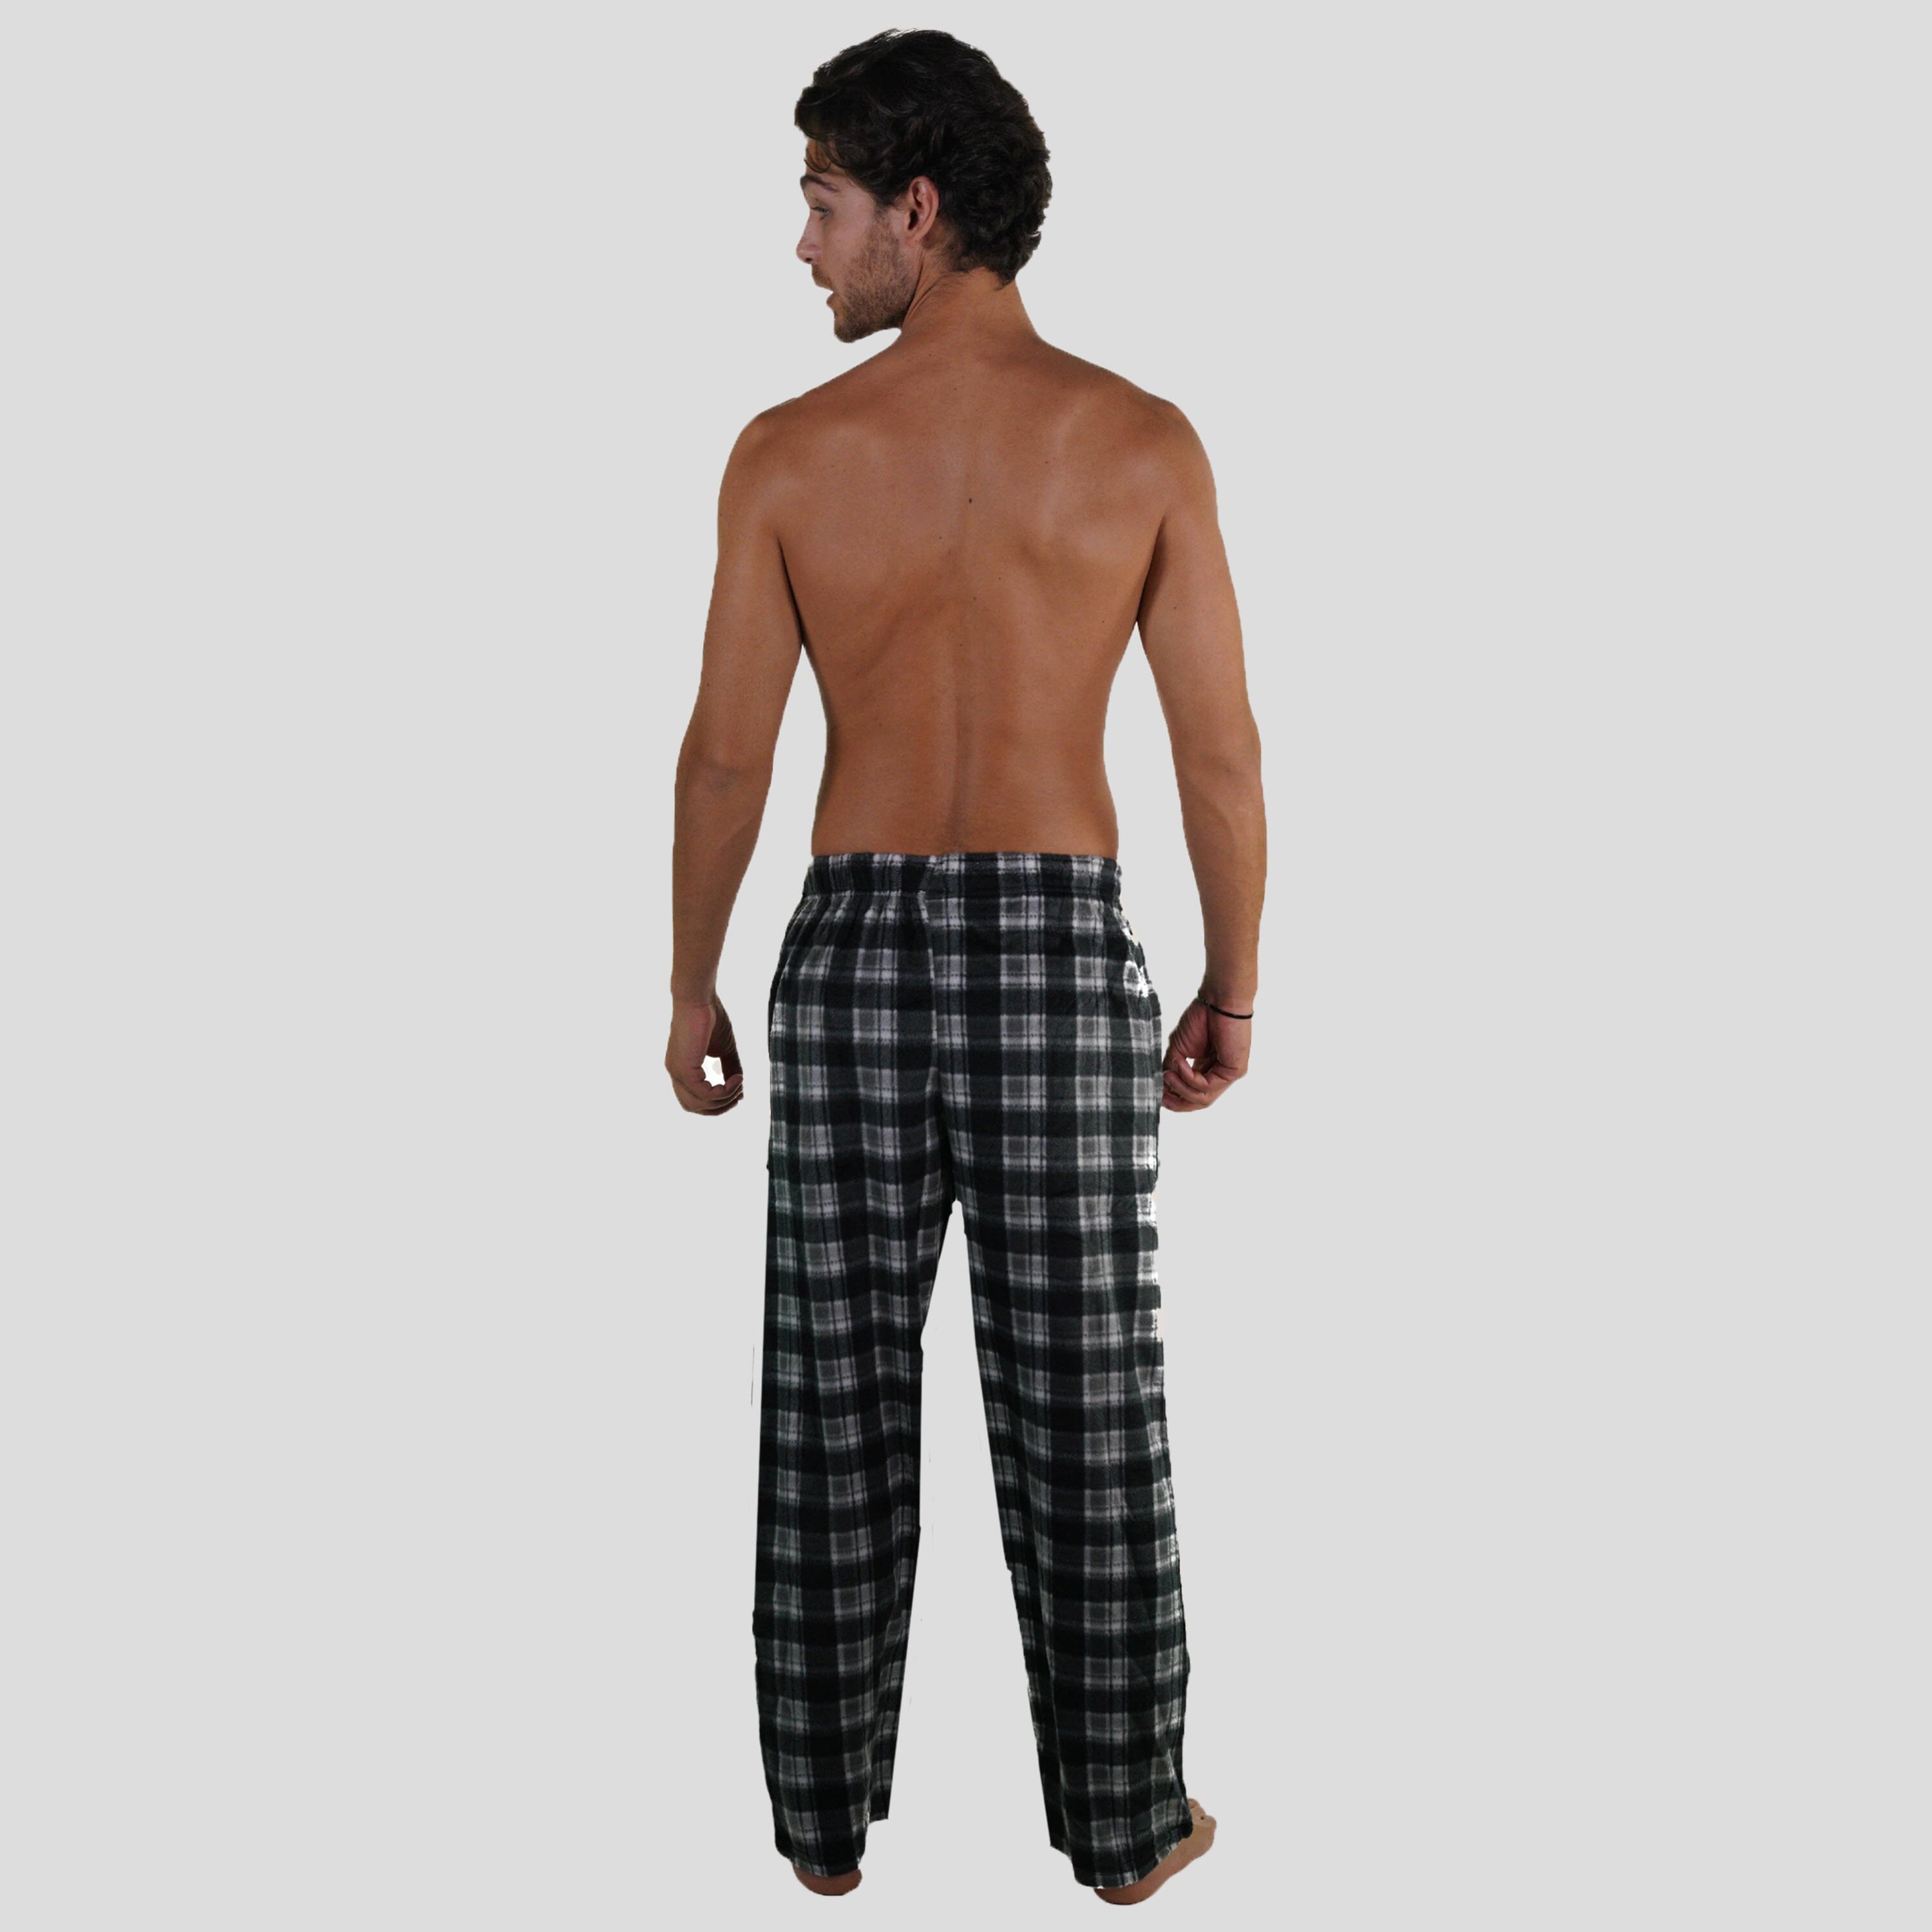 Members Only Men's Fleece Sleep Pant with Two Side Pockets - Multi Colored  Loungewear, Relaxed Fit Pajama Pants for Men, Red Plaid L